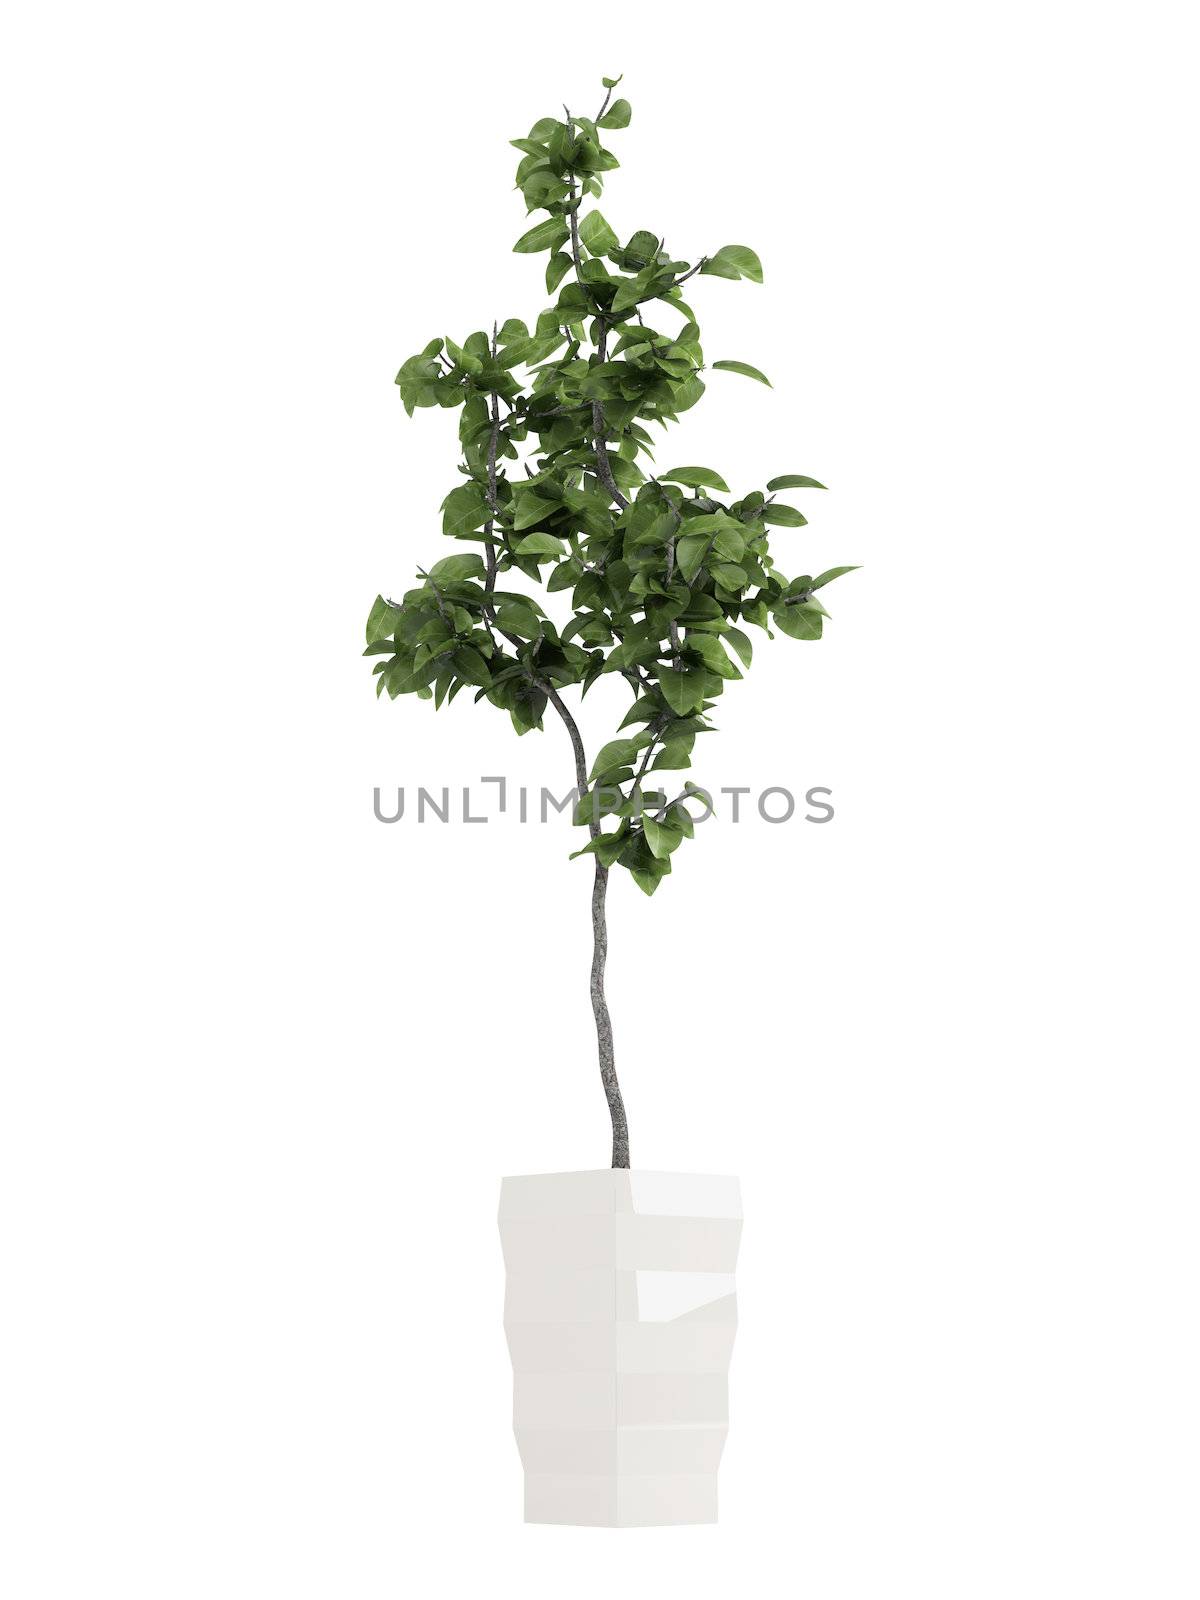 Bay laurel tree, an aromatic evergreen tree with glossy leaves used in cooking, growing as a potted houseplat isolated on white